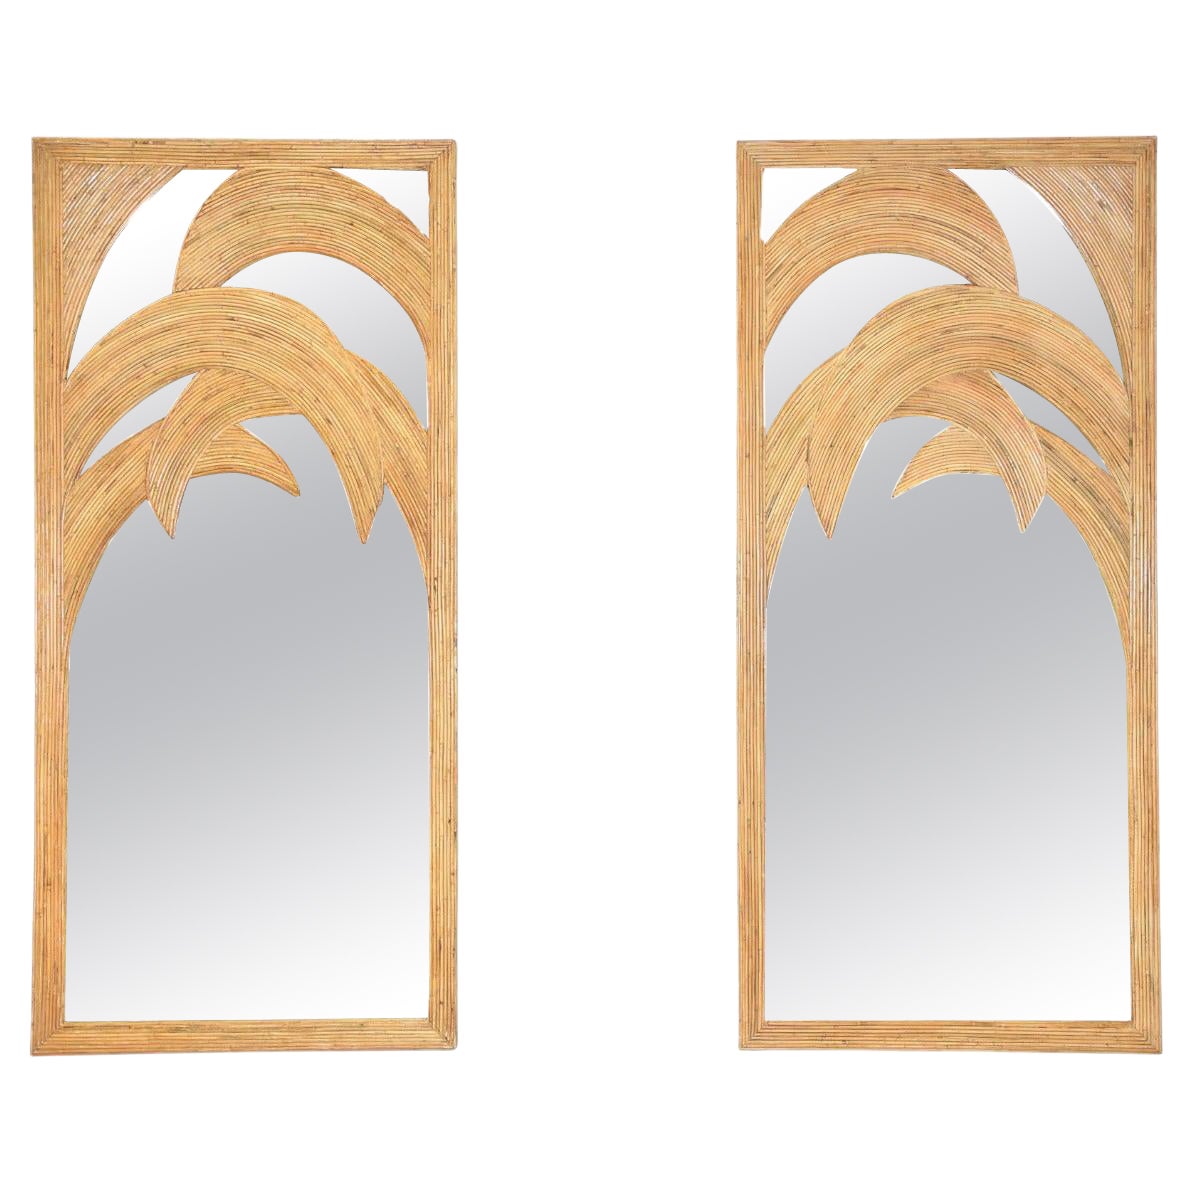 Rare Pair Large Rattan Bamboo Mirror by Vivai del Sud Roma, 1970s